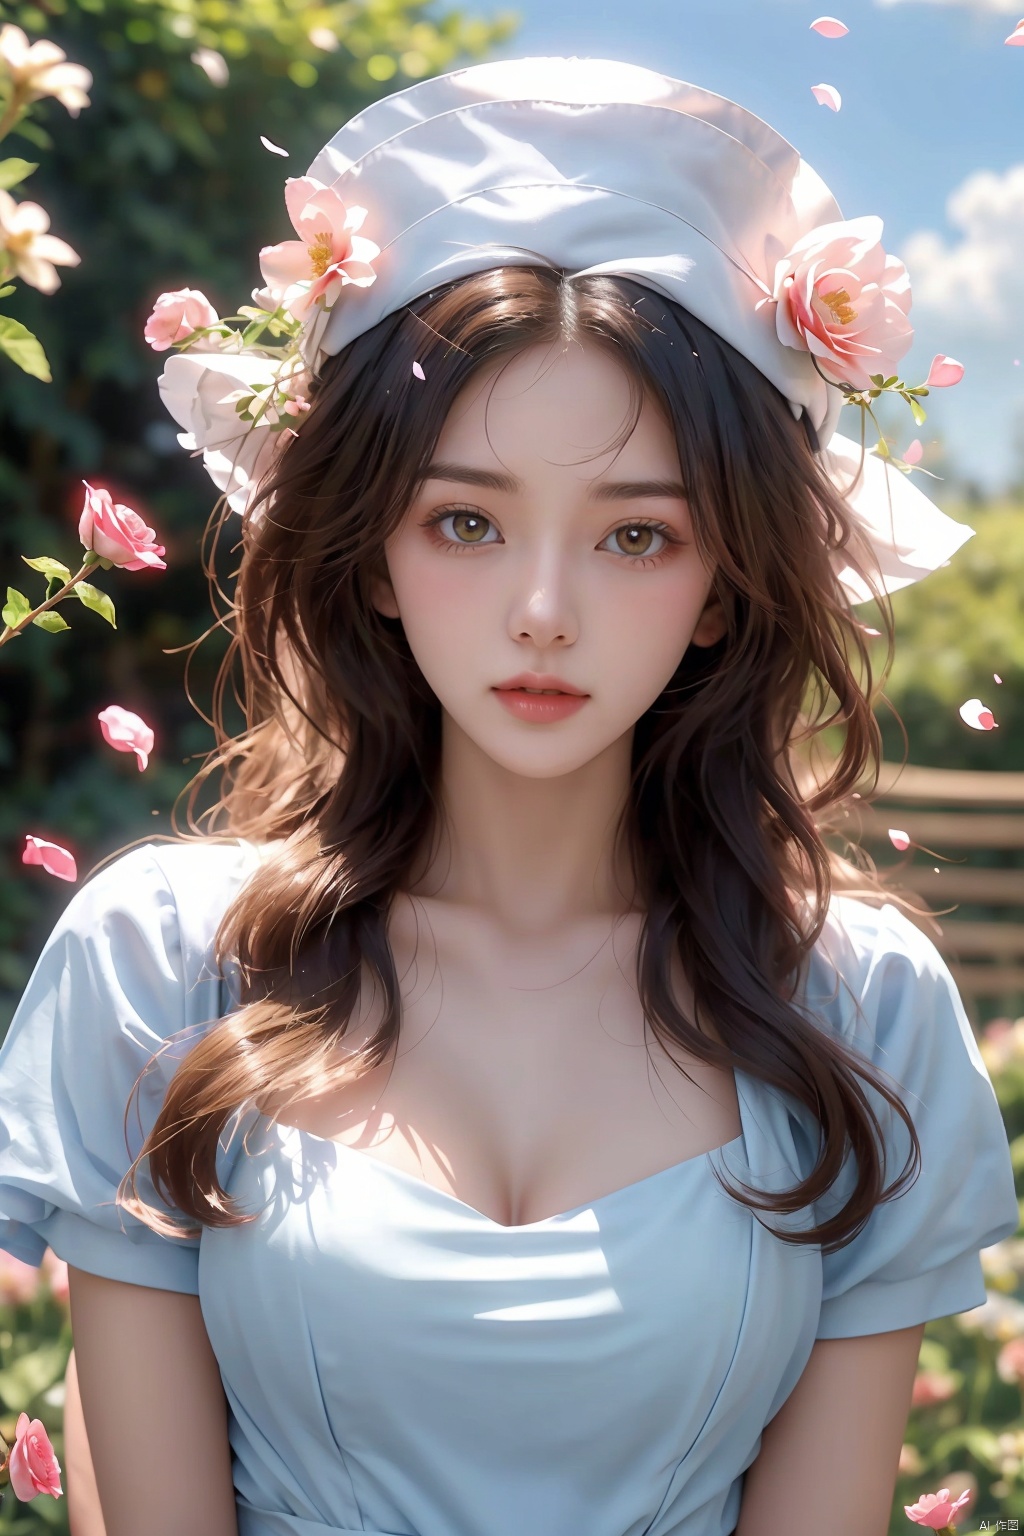  masterpiece, 1 girl, 18 years old, Look at me, long_hair, straw_hat, Wreath, petals, Big breasts, Light blue sky, Clouds, hat_flower, jewelry, Stand, outdoors, Garden, falling_petals, White dress, ajkds, textured skin, super detail, best quality, Trainee Nurse, flower